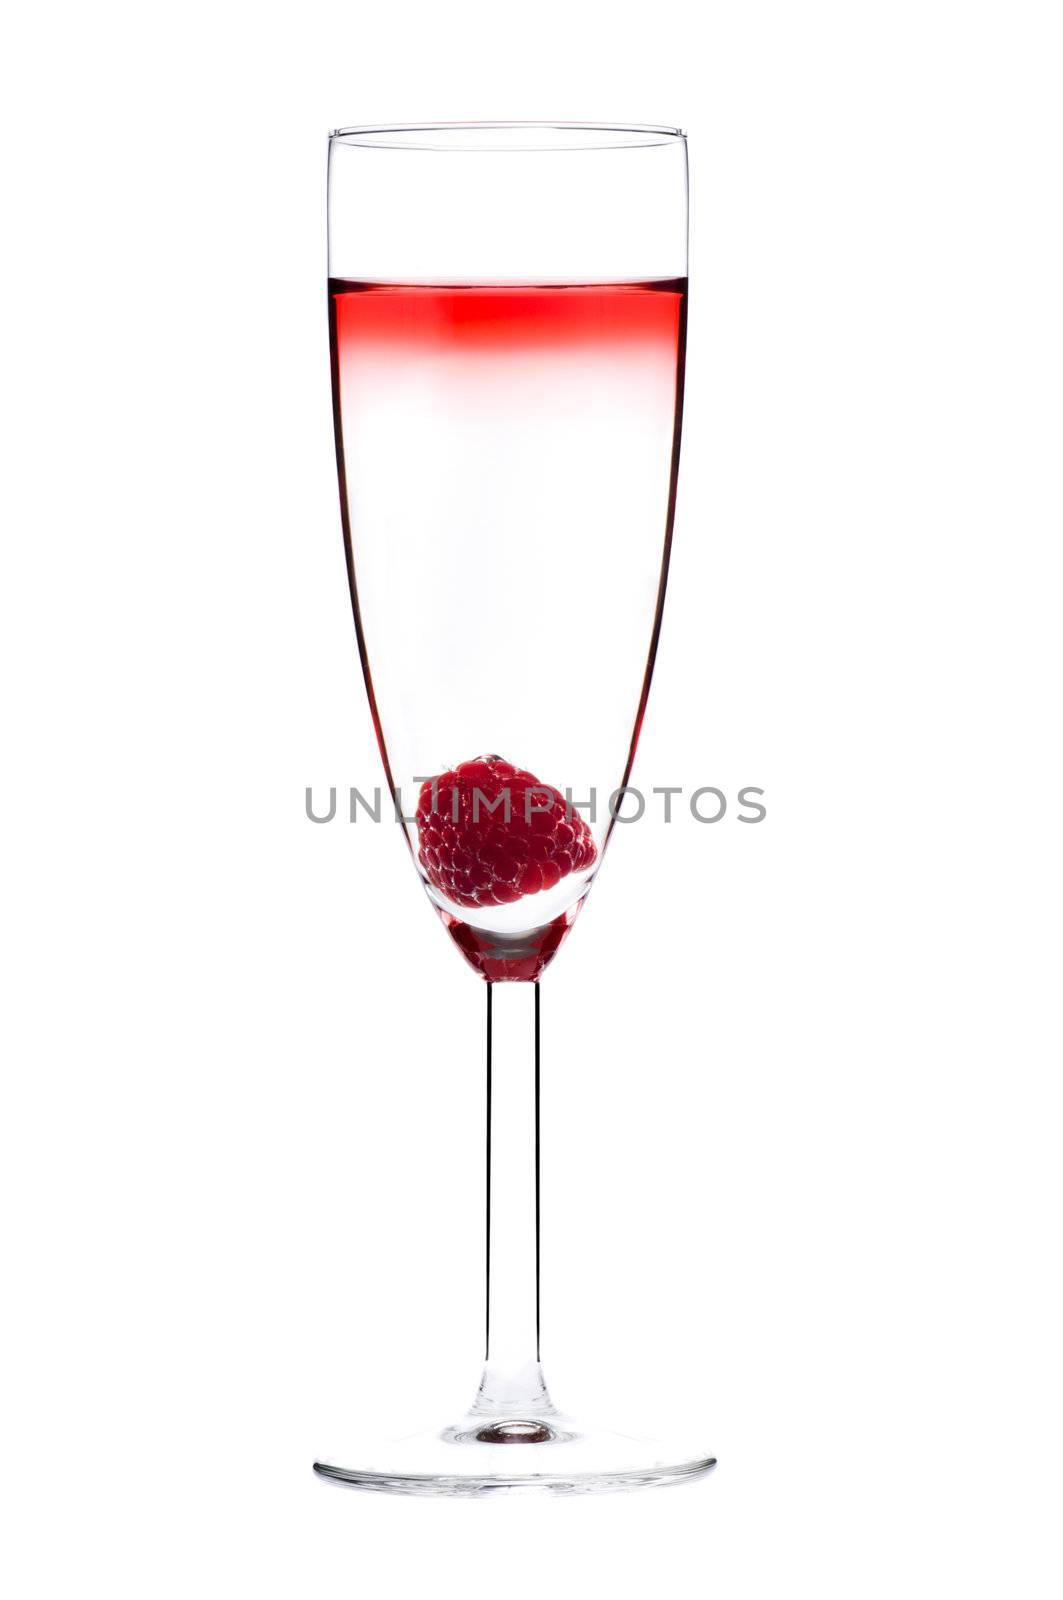 Designer cocktail isolated over white with raspberry in Champaign flute